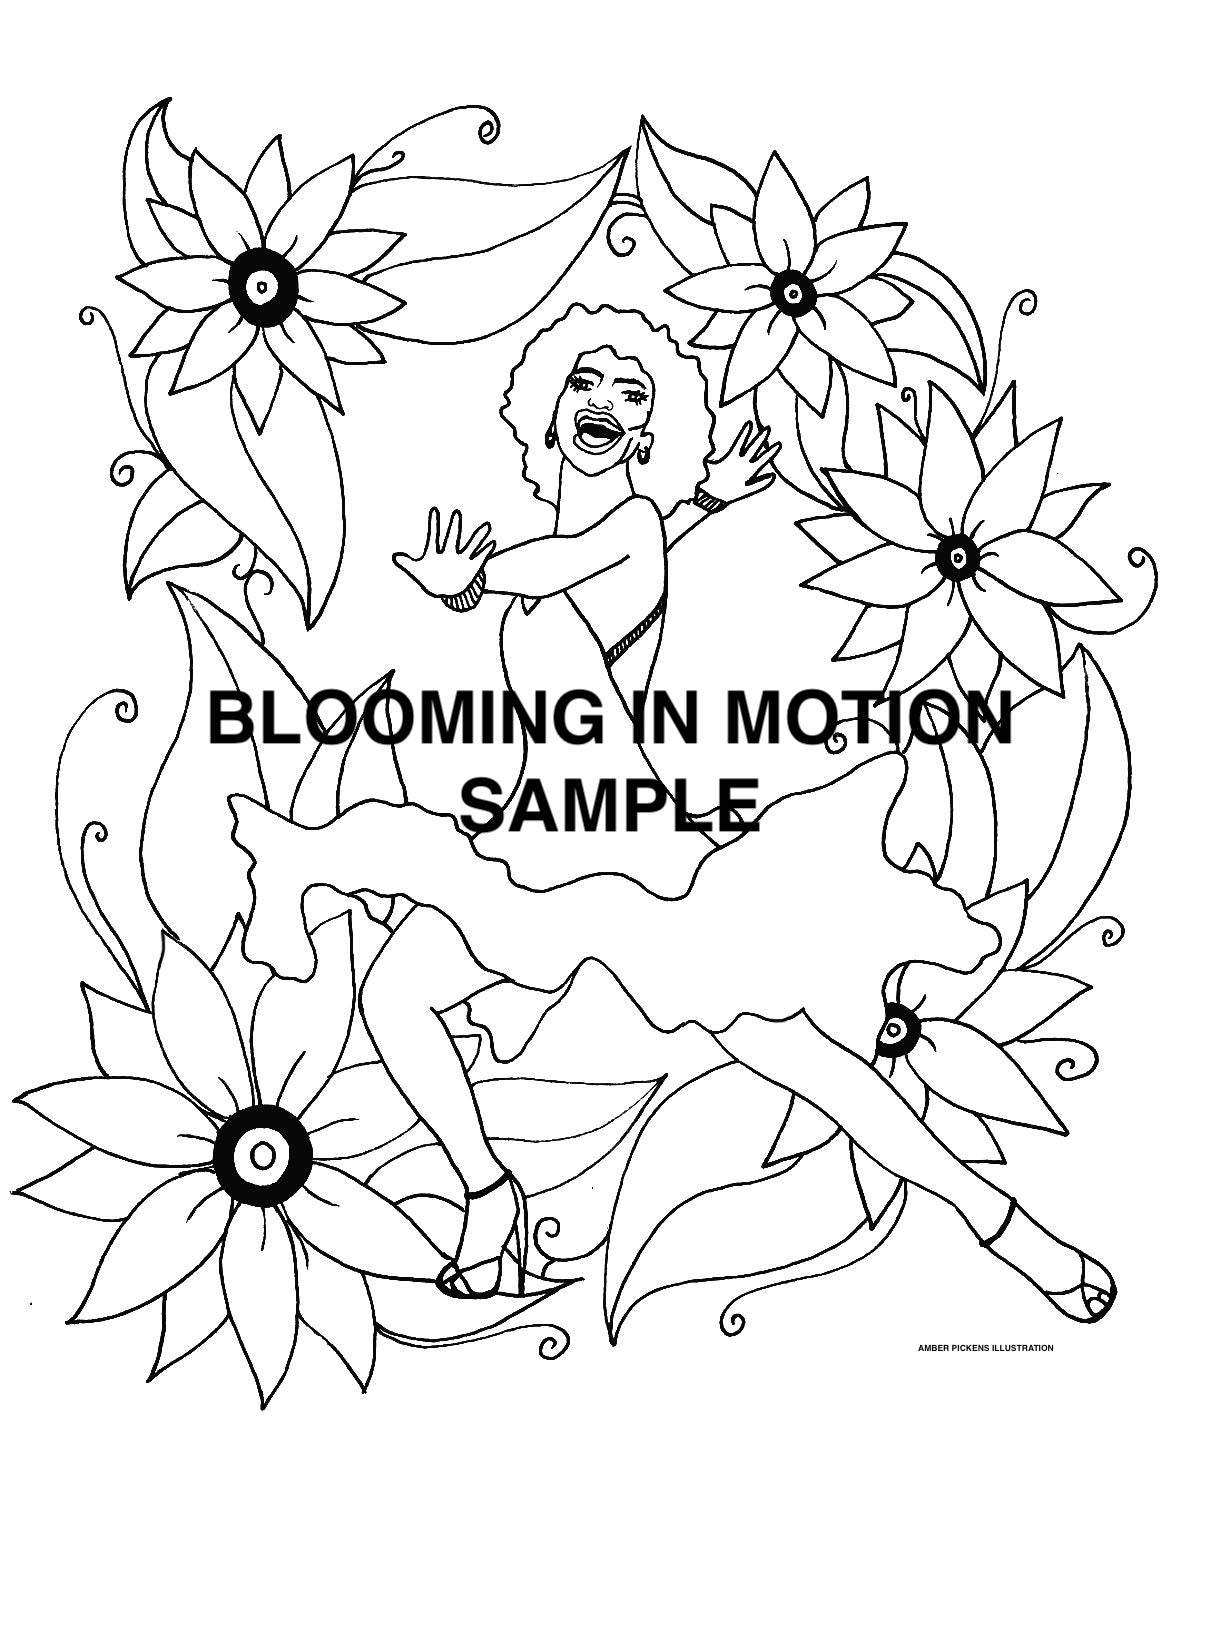 Blooming in Motion by Amber Pickens sample page